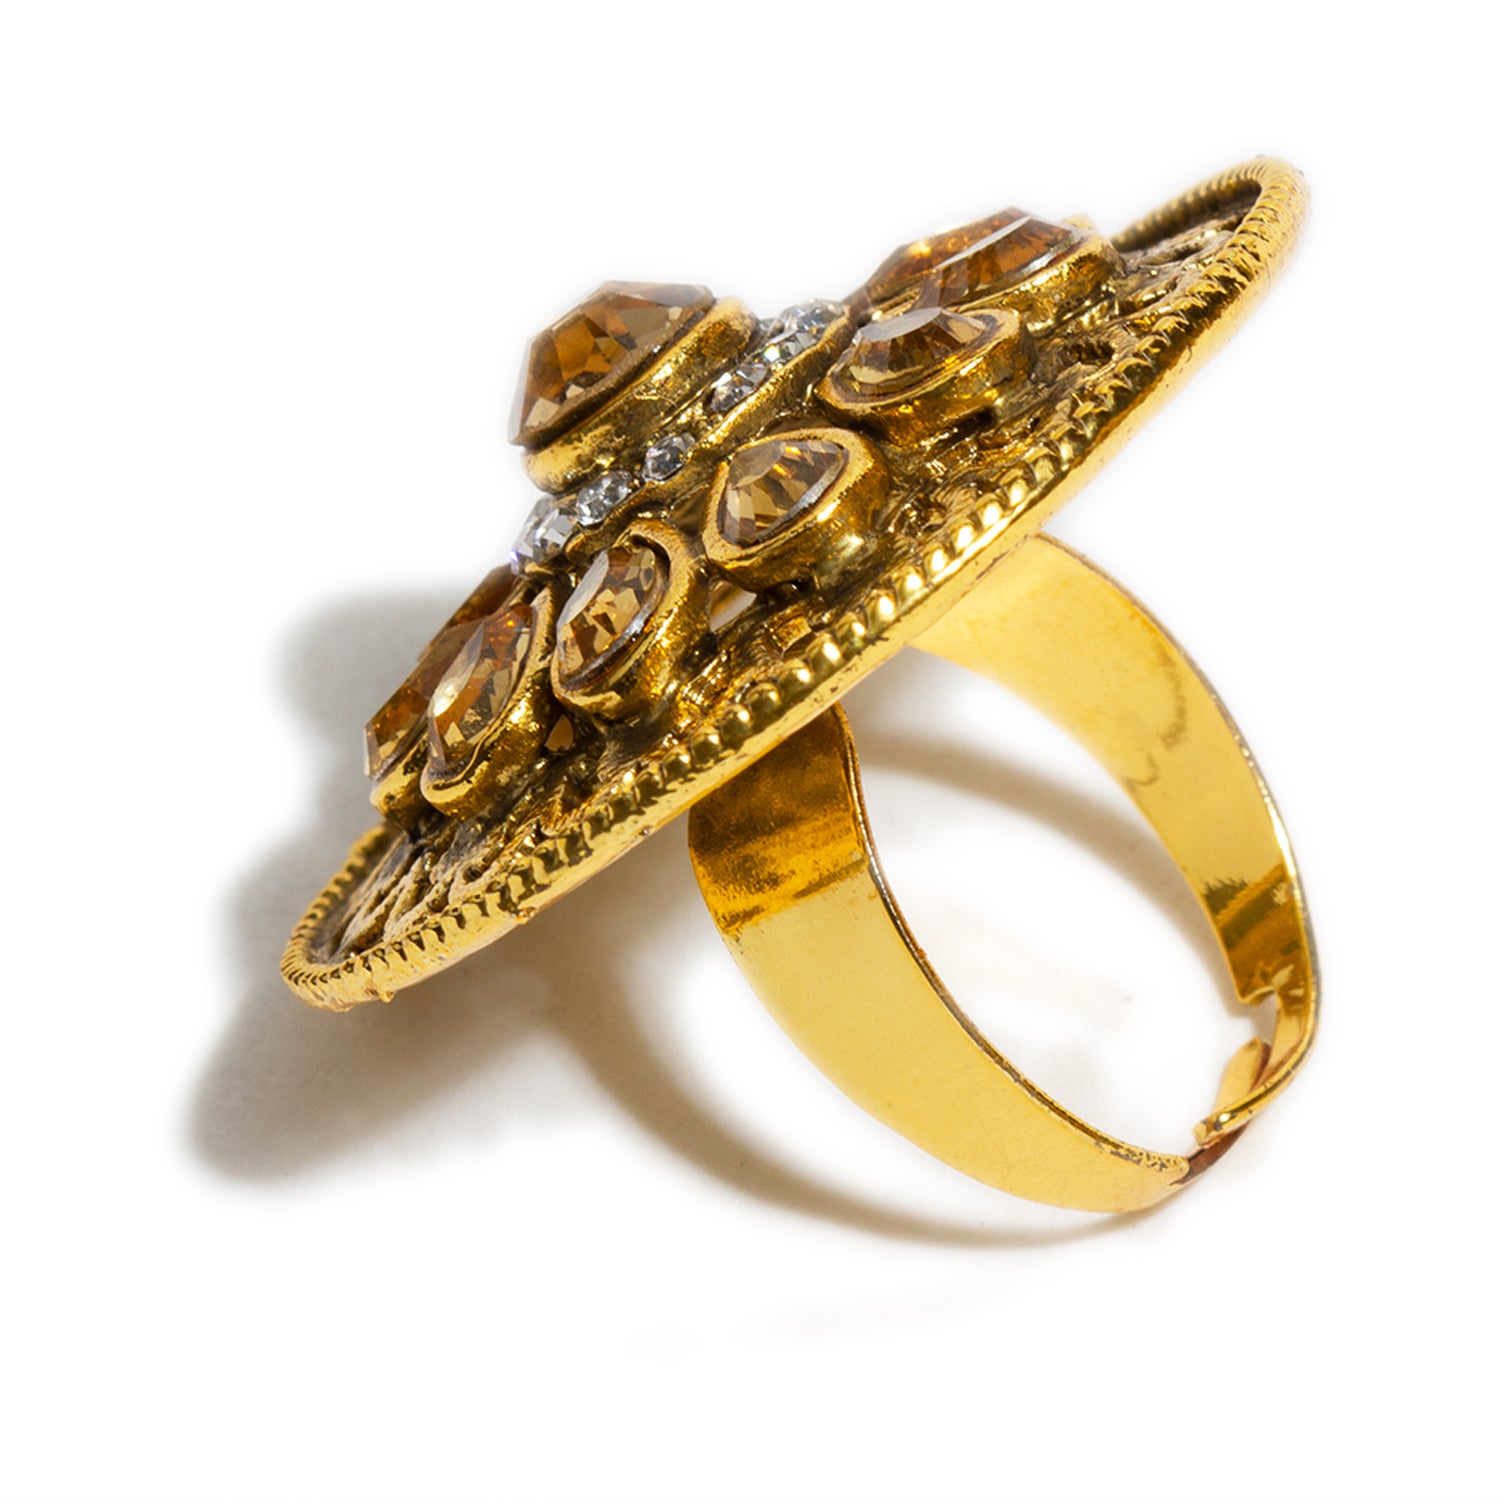 YouTube | Gold ring designs, Gold rings fashion, Ring designs